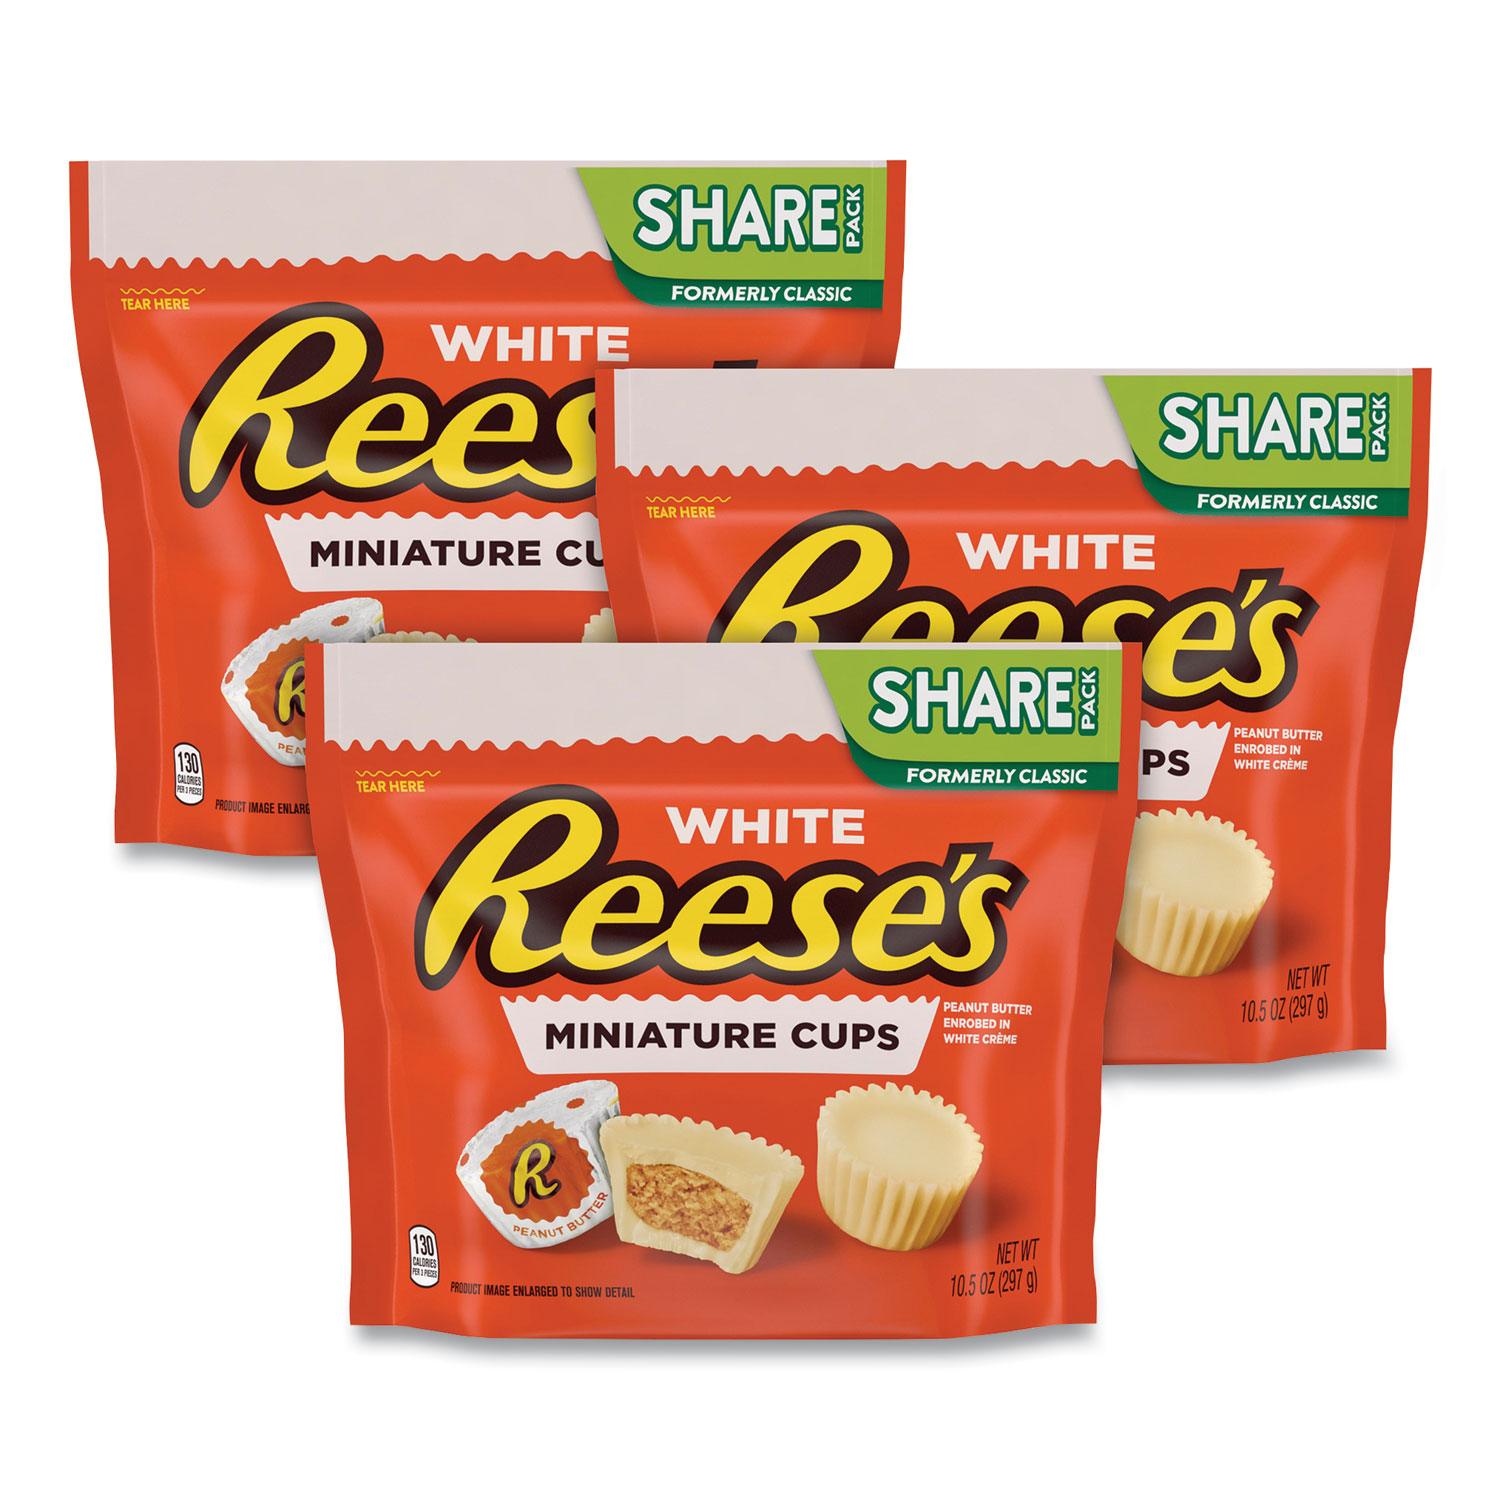  Reese's 43223 Peanut Butter Cups Miniatures Share Pack, White Creme, 10.5 oz Bag, 3 Bags/Pack, Free Delivery in 1-4 Business Days (GRR24600436) 